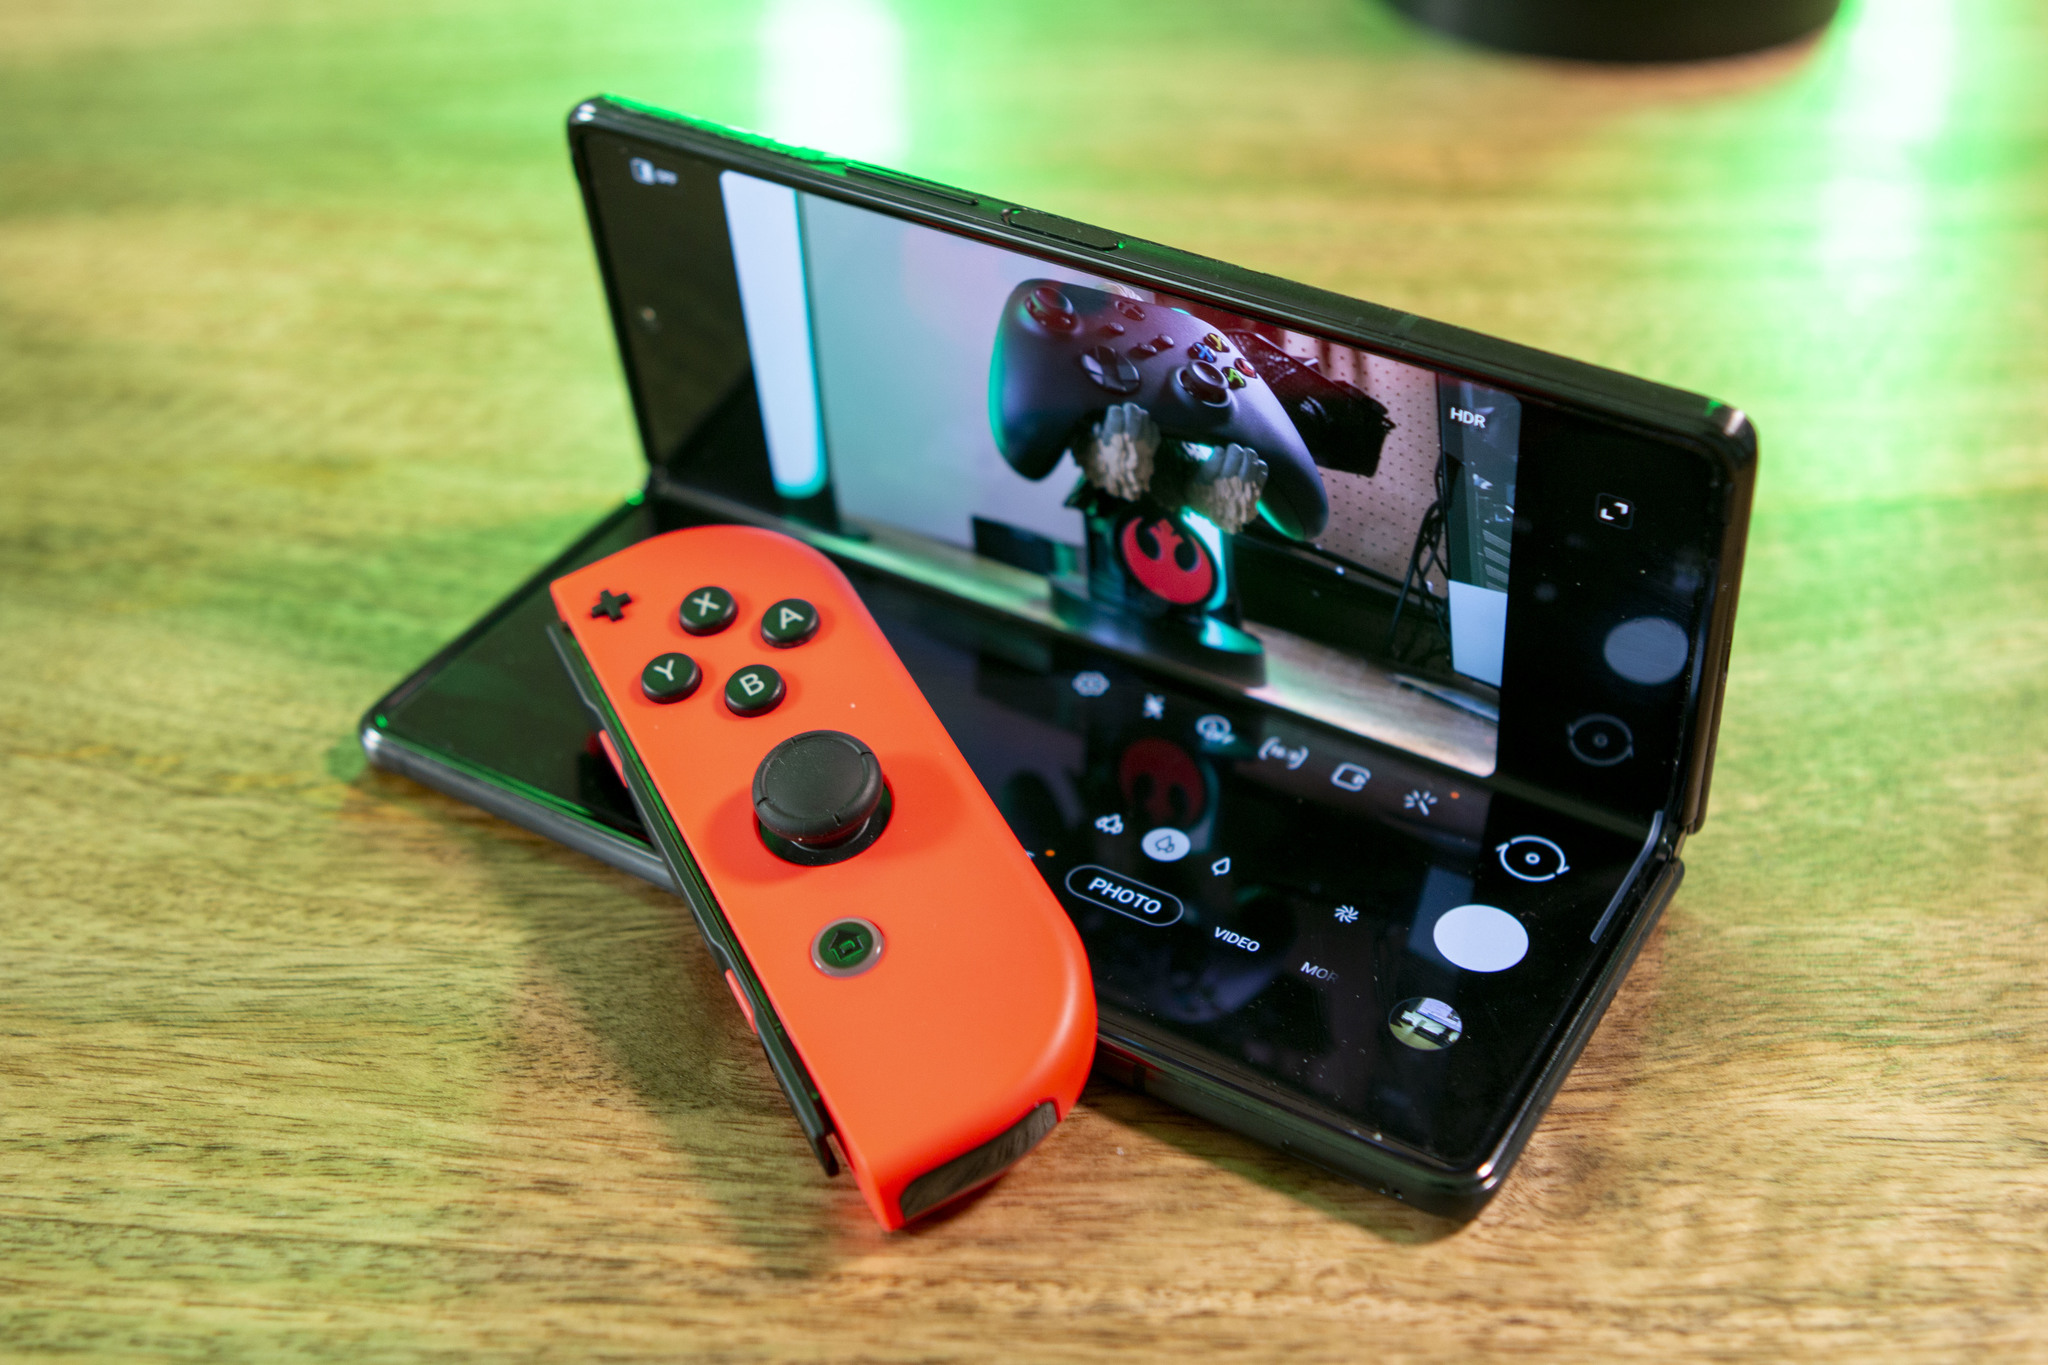 Forget using an S Pen, use a Nintendo Switch Joy-Con as your remote